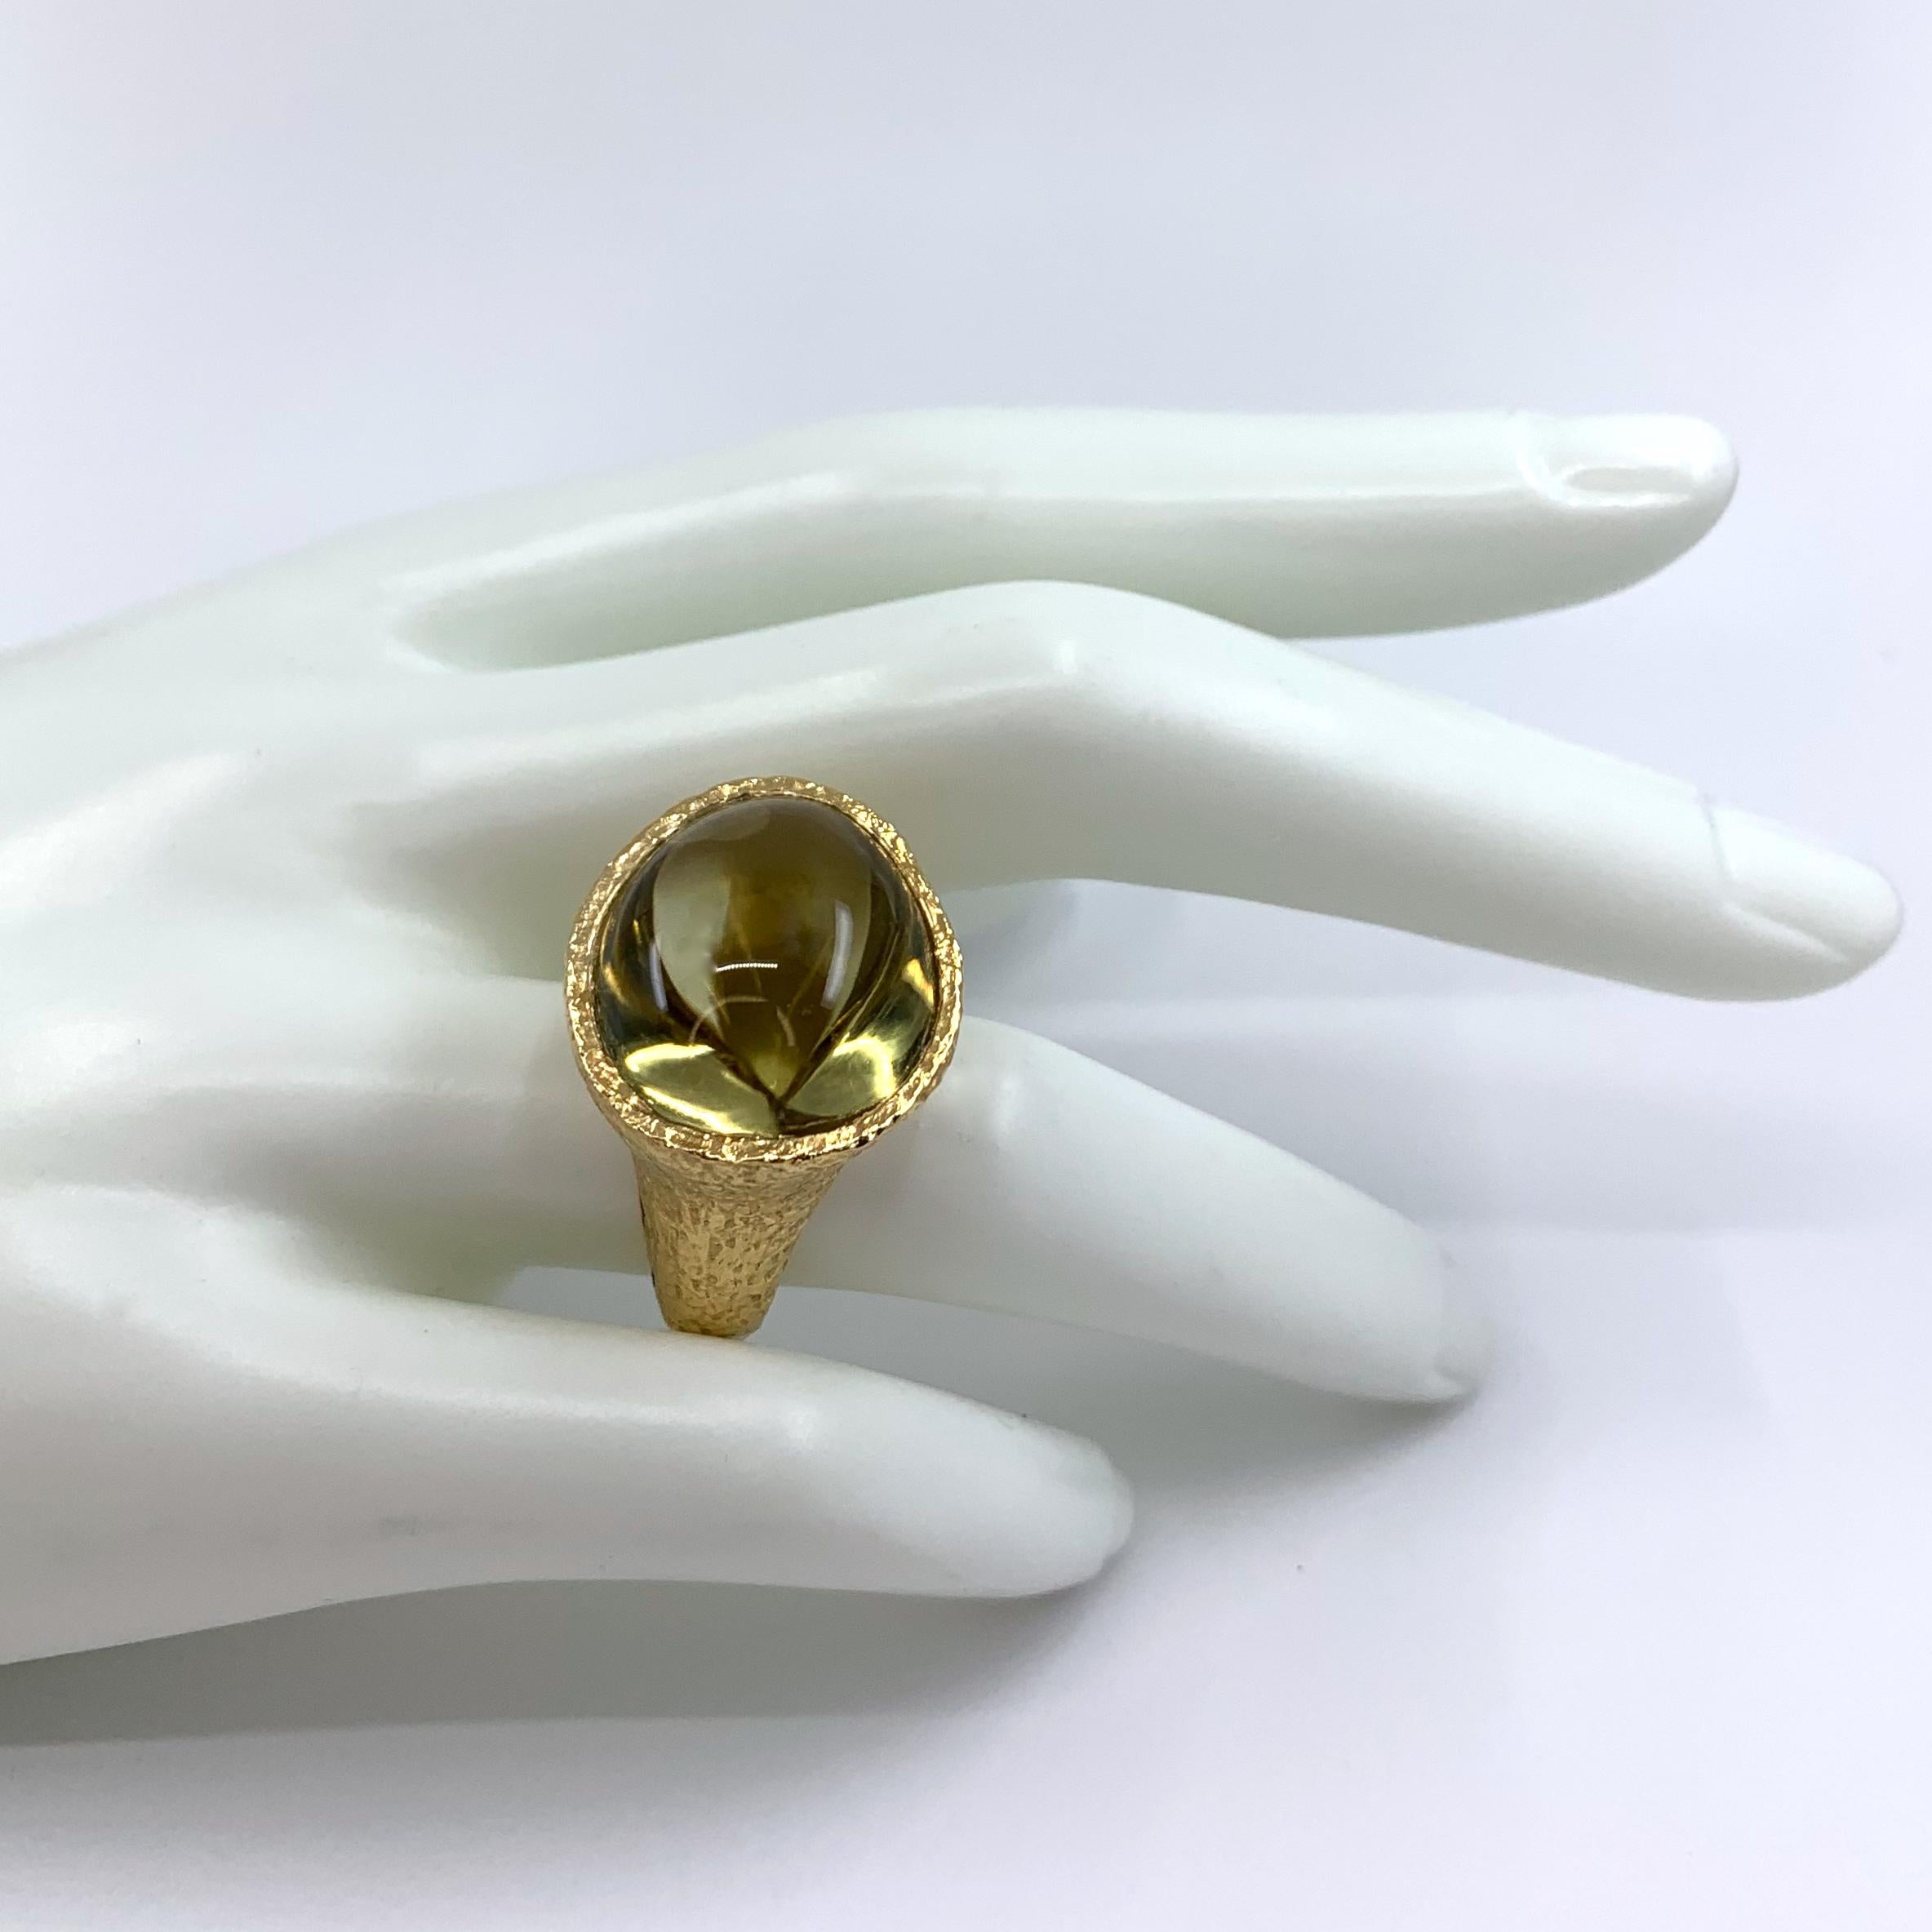 26 Carat Lemon Citrine Cabochon in Textured 18 Karat Gold Ring w Diamond Accent In New Condition For Sale In Sherman Oaks, CA